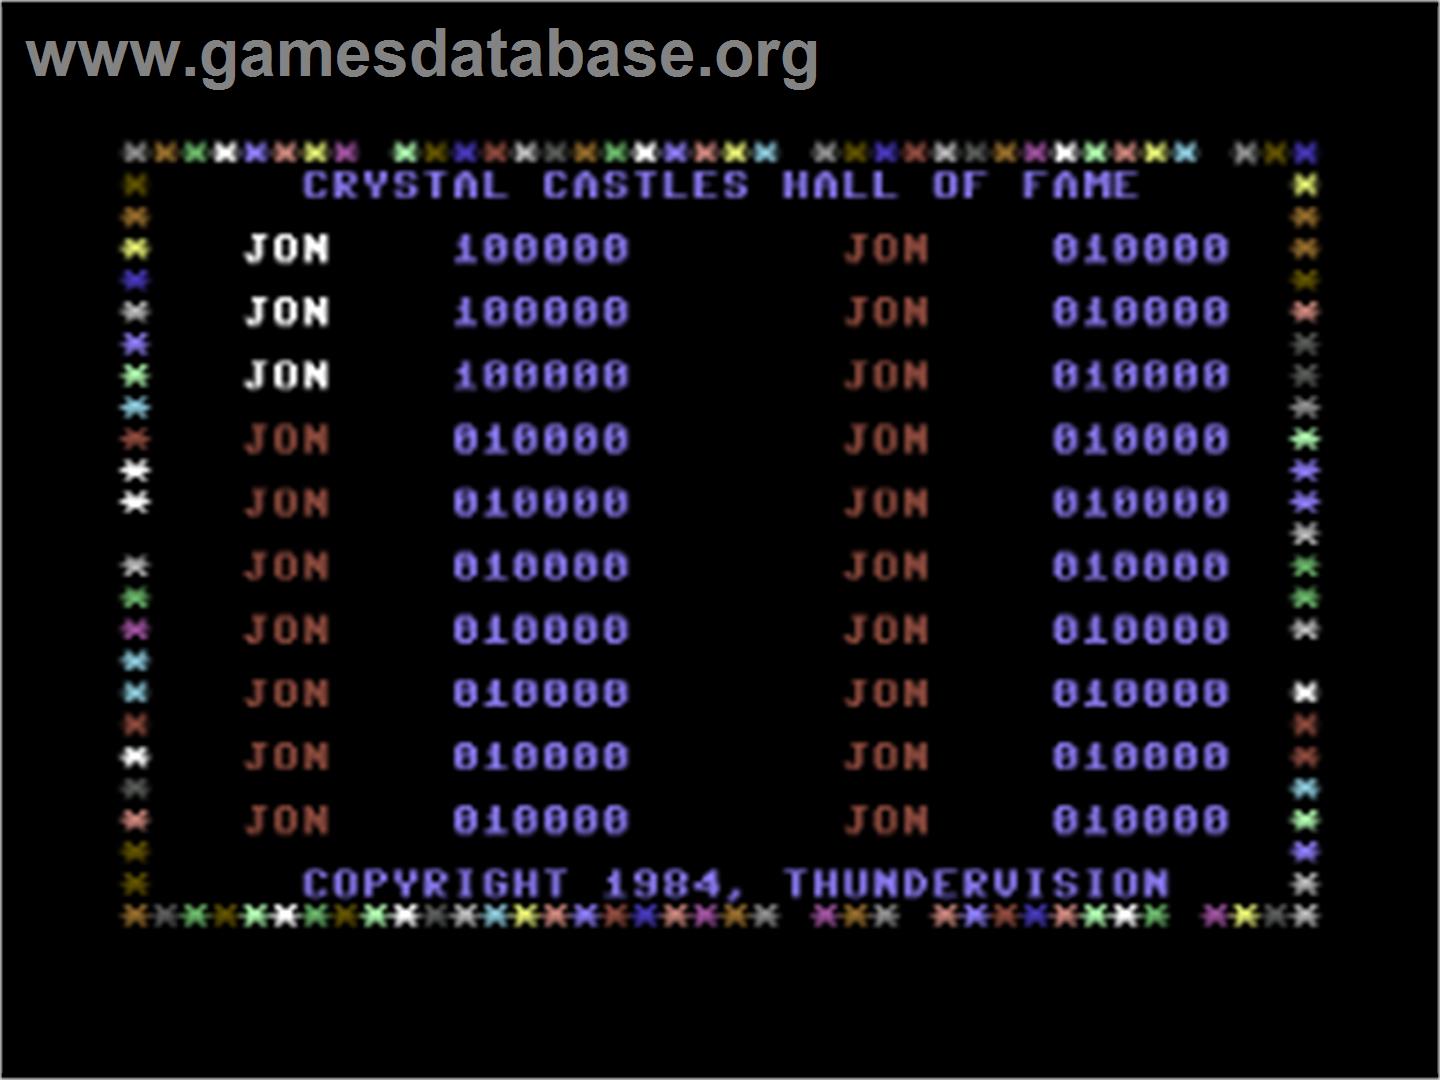 Crystal Castles - Commodore 64 - Artwork - Title Screen